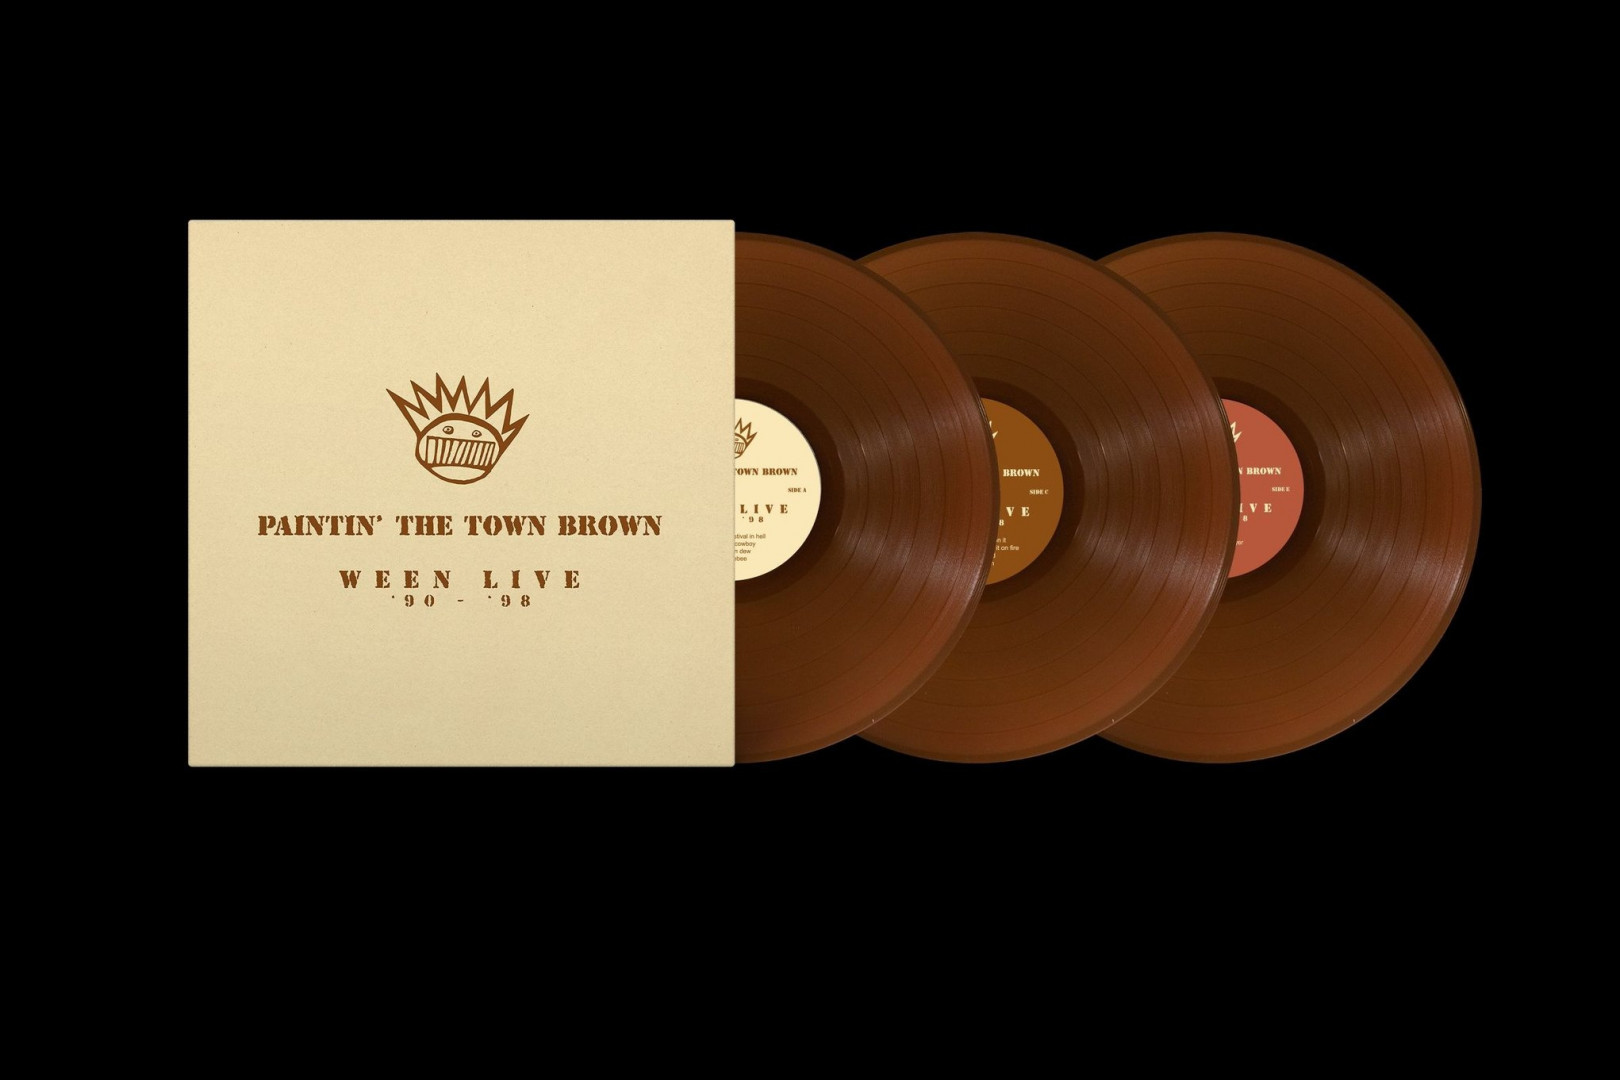 Ween re-releases 'Paintin' The Town Brown '